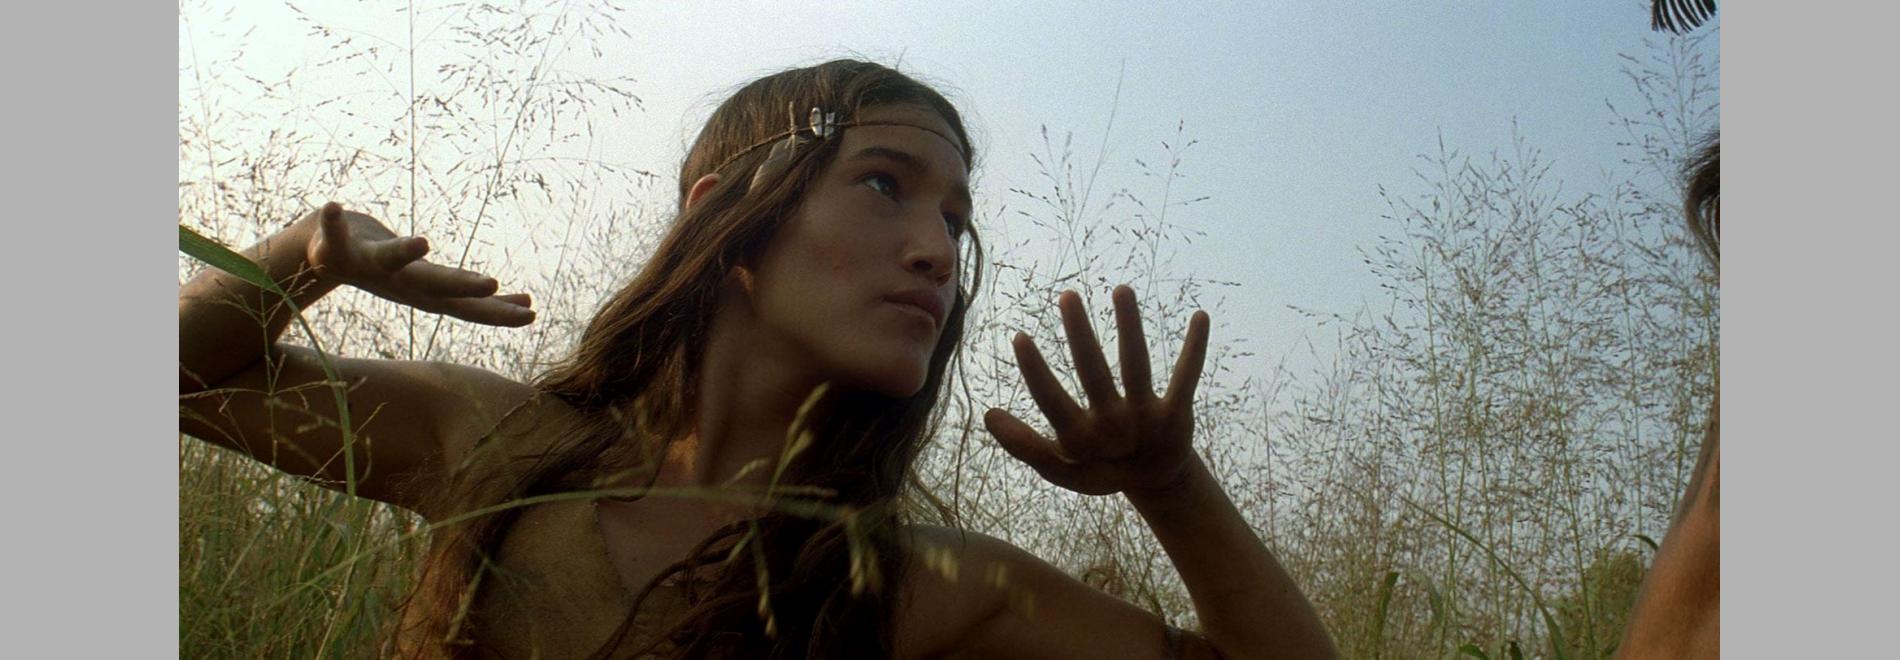 The New World (Terrence Malick, 2011)